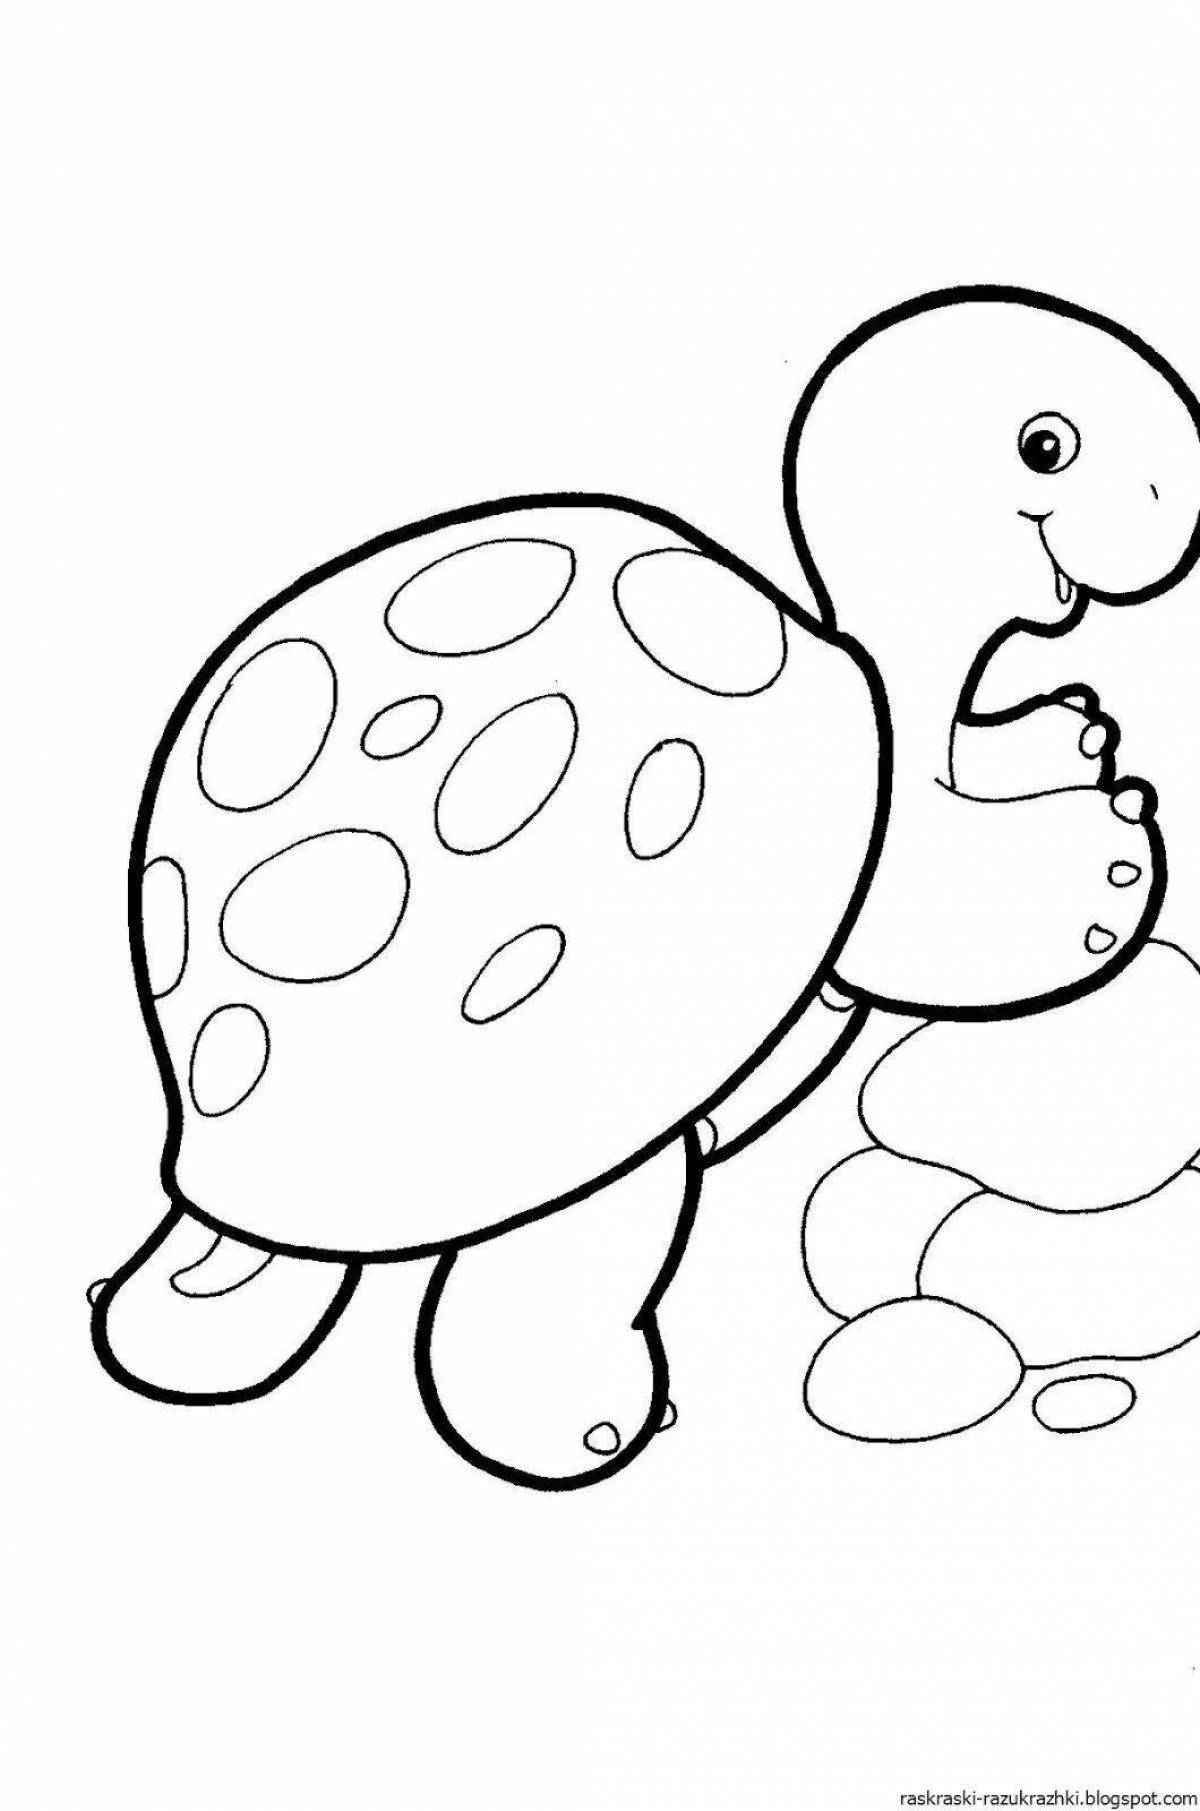 Luminous coloring pages for children 3-4 years old: simple animals